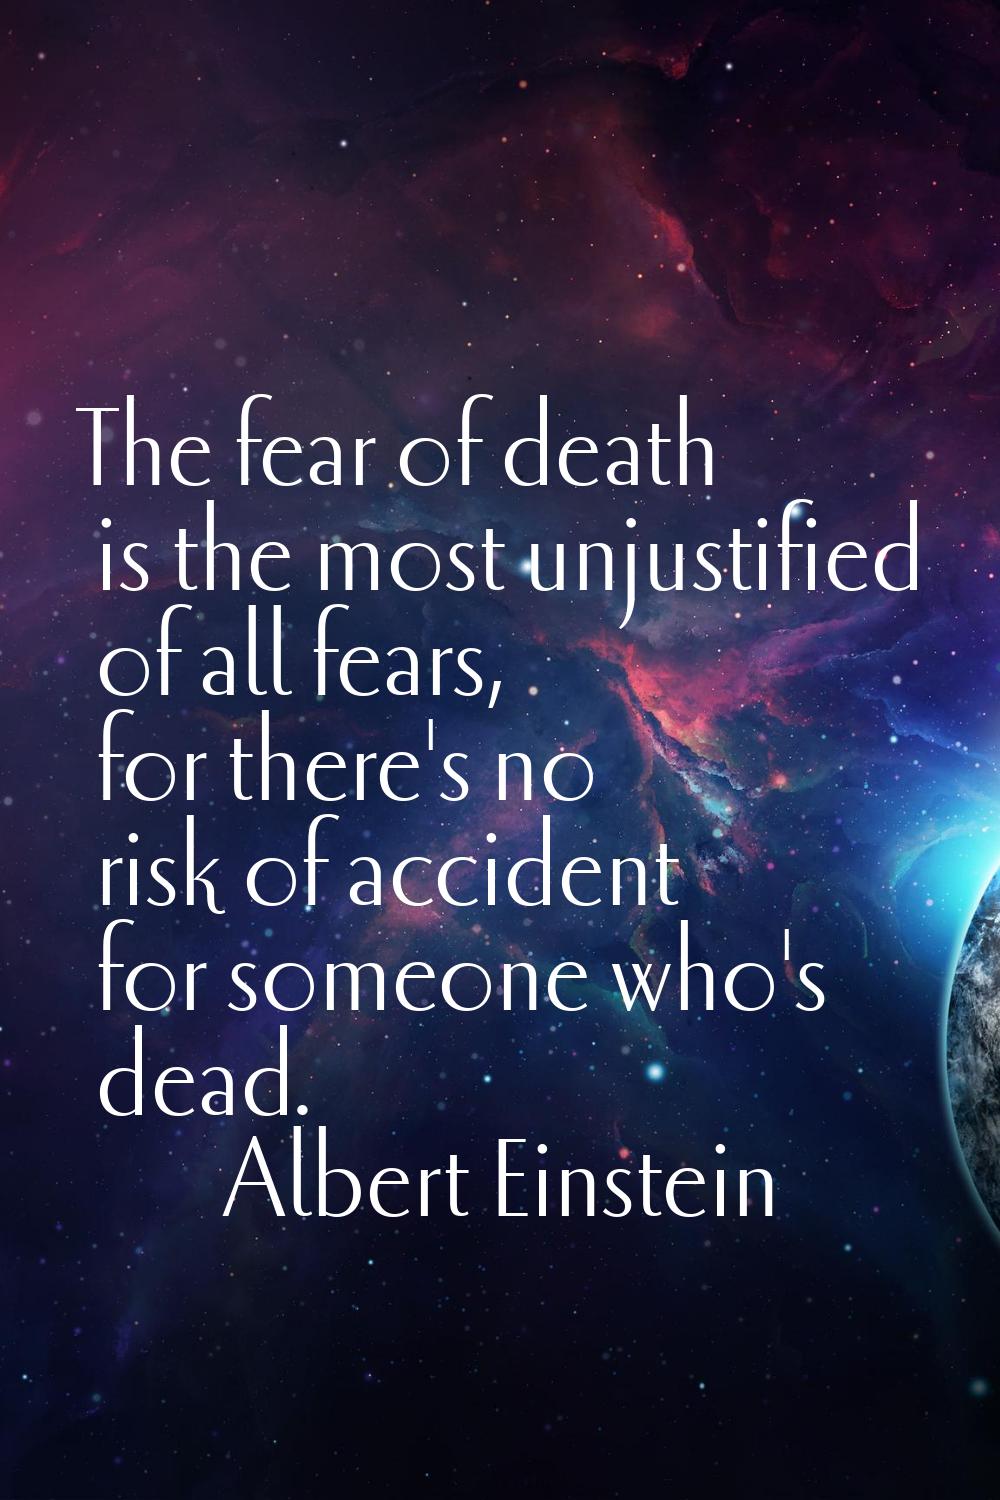 The fear of death is the most unjustified of all fears, for there's no risk of accident for someone